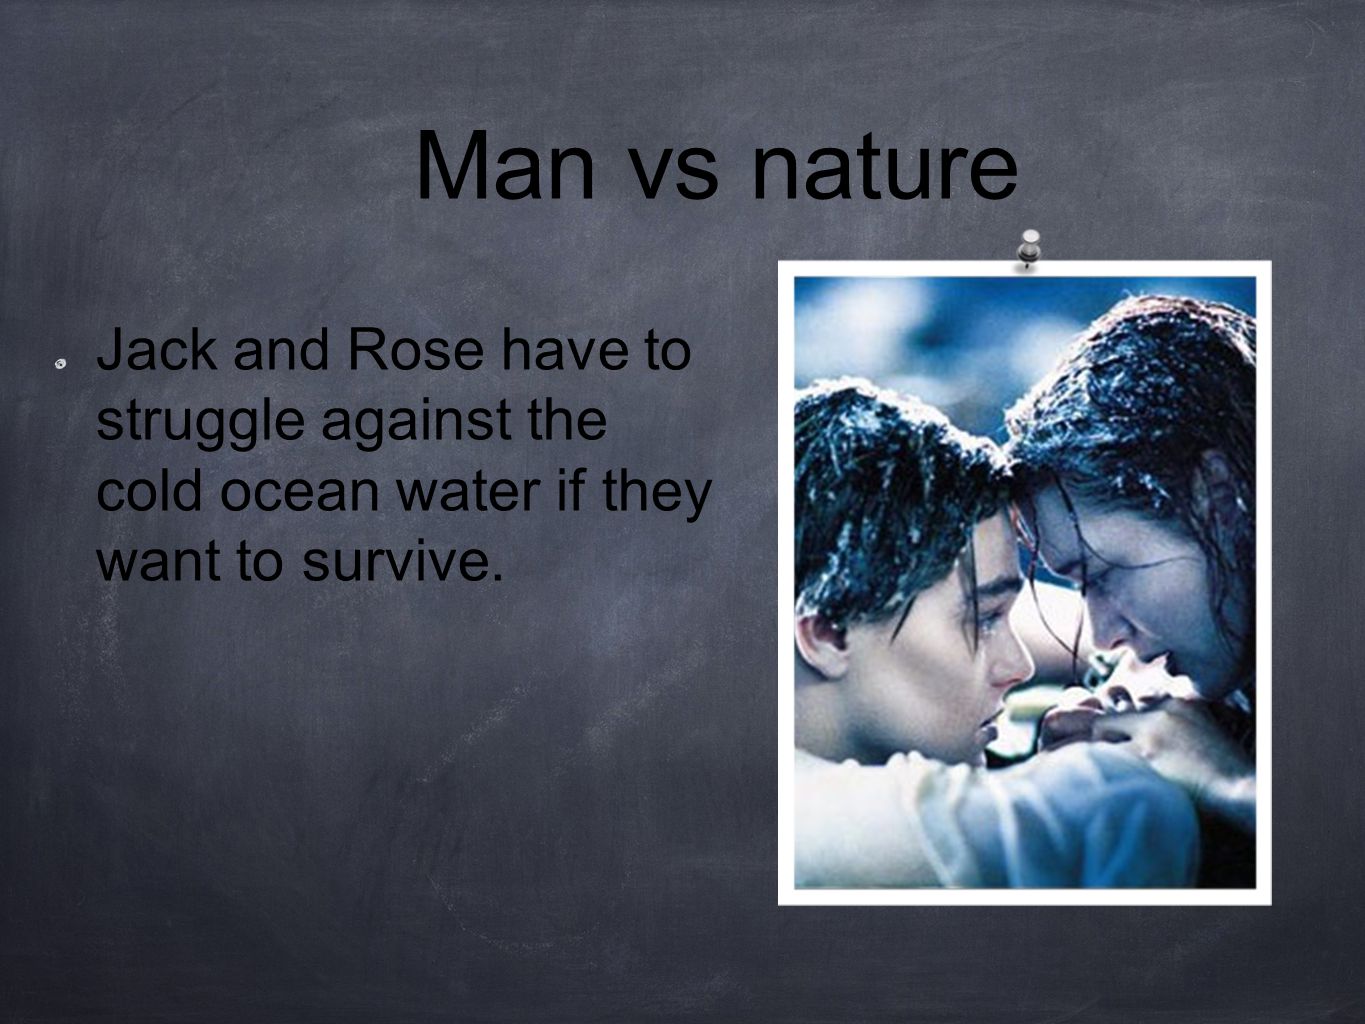 Man vs nature Jack and Rose have to struggle against the cold ocean water if they want to survive.